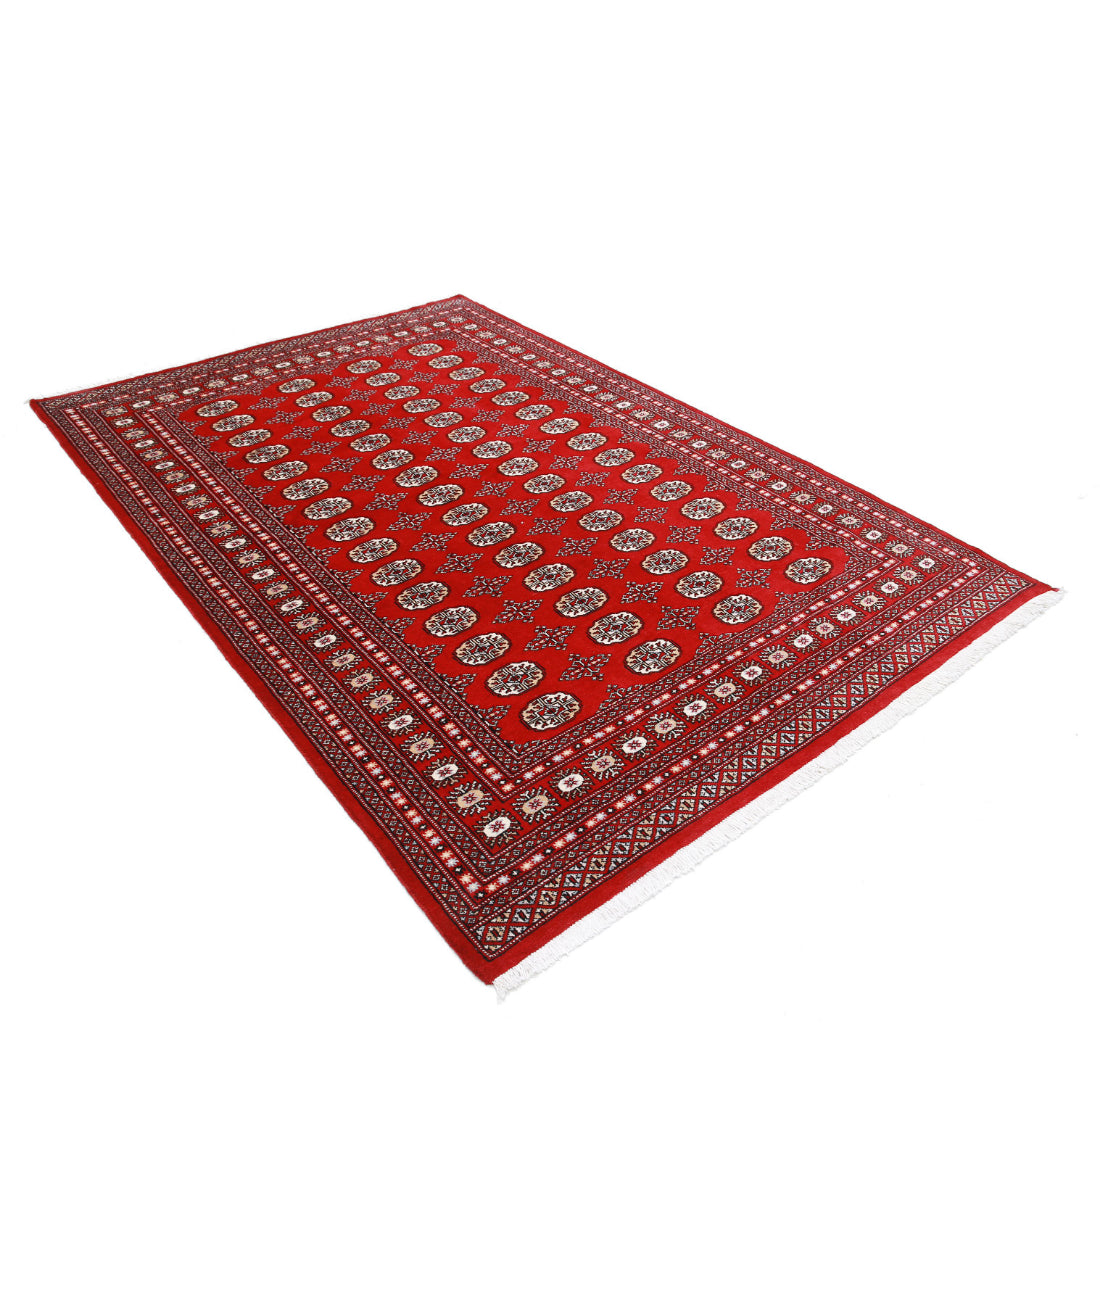 Hand Knotted Tribal Bokhara Wool Rug - 6'0'' x 8'10'' 6'0'' x 8'10'' (180 X 265) / Red / Black